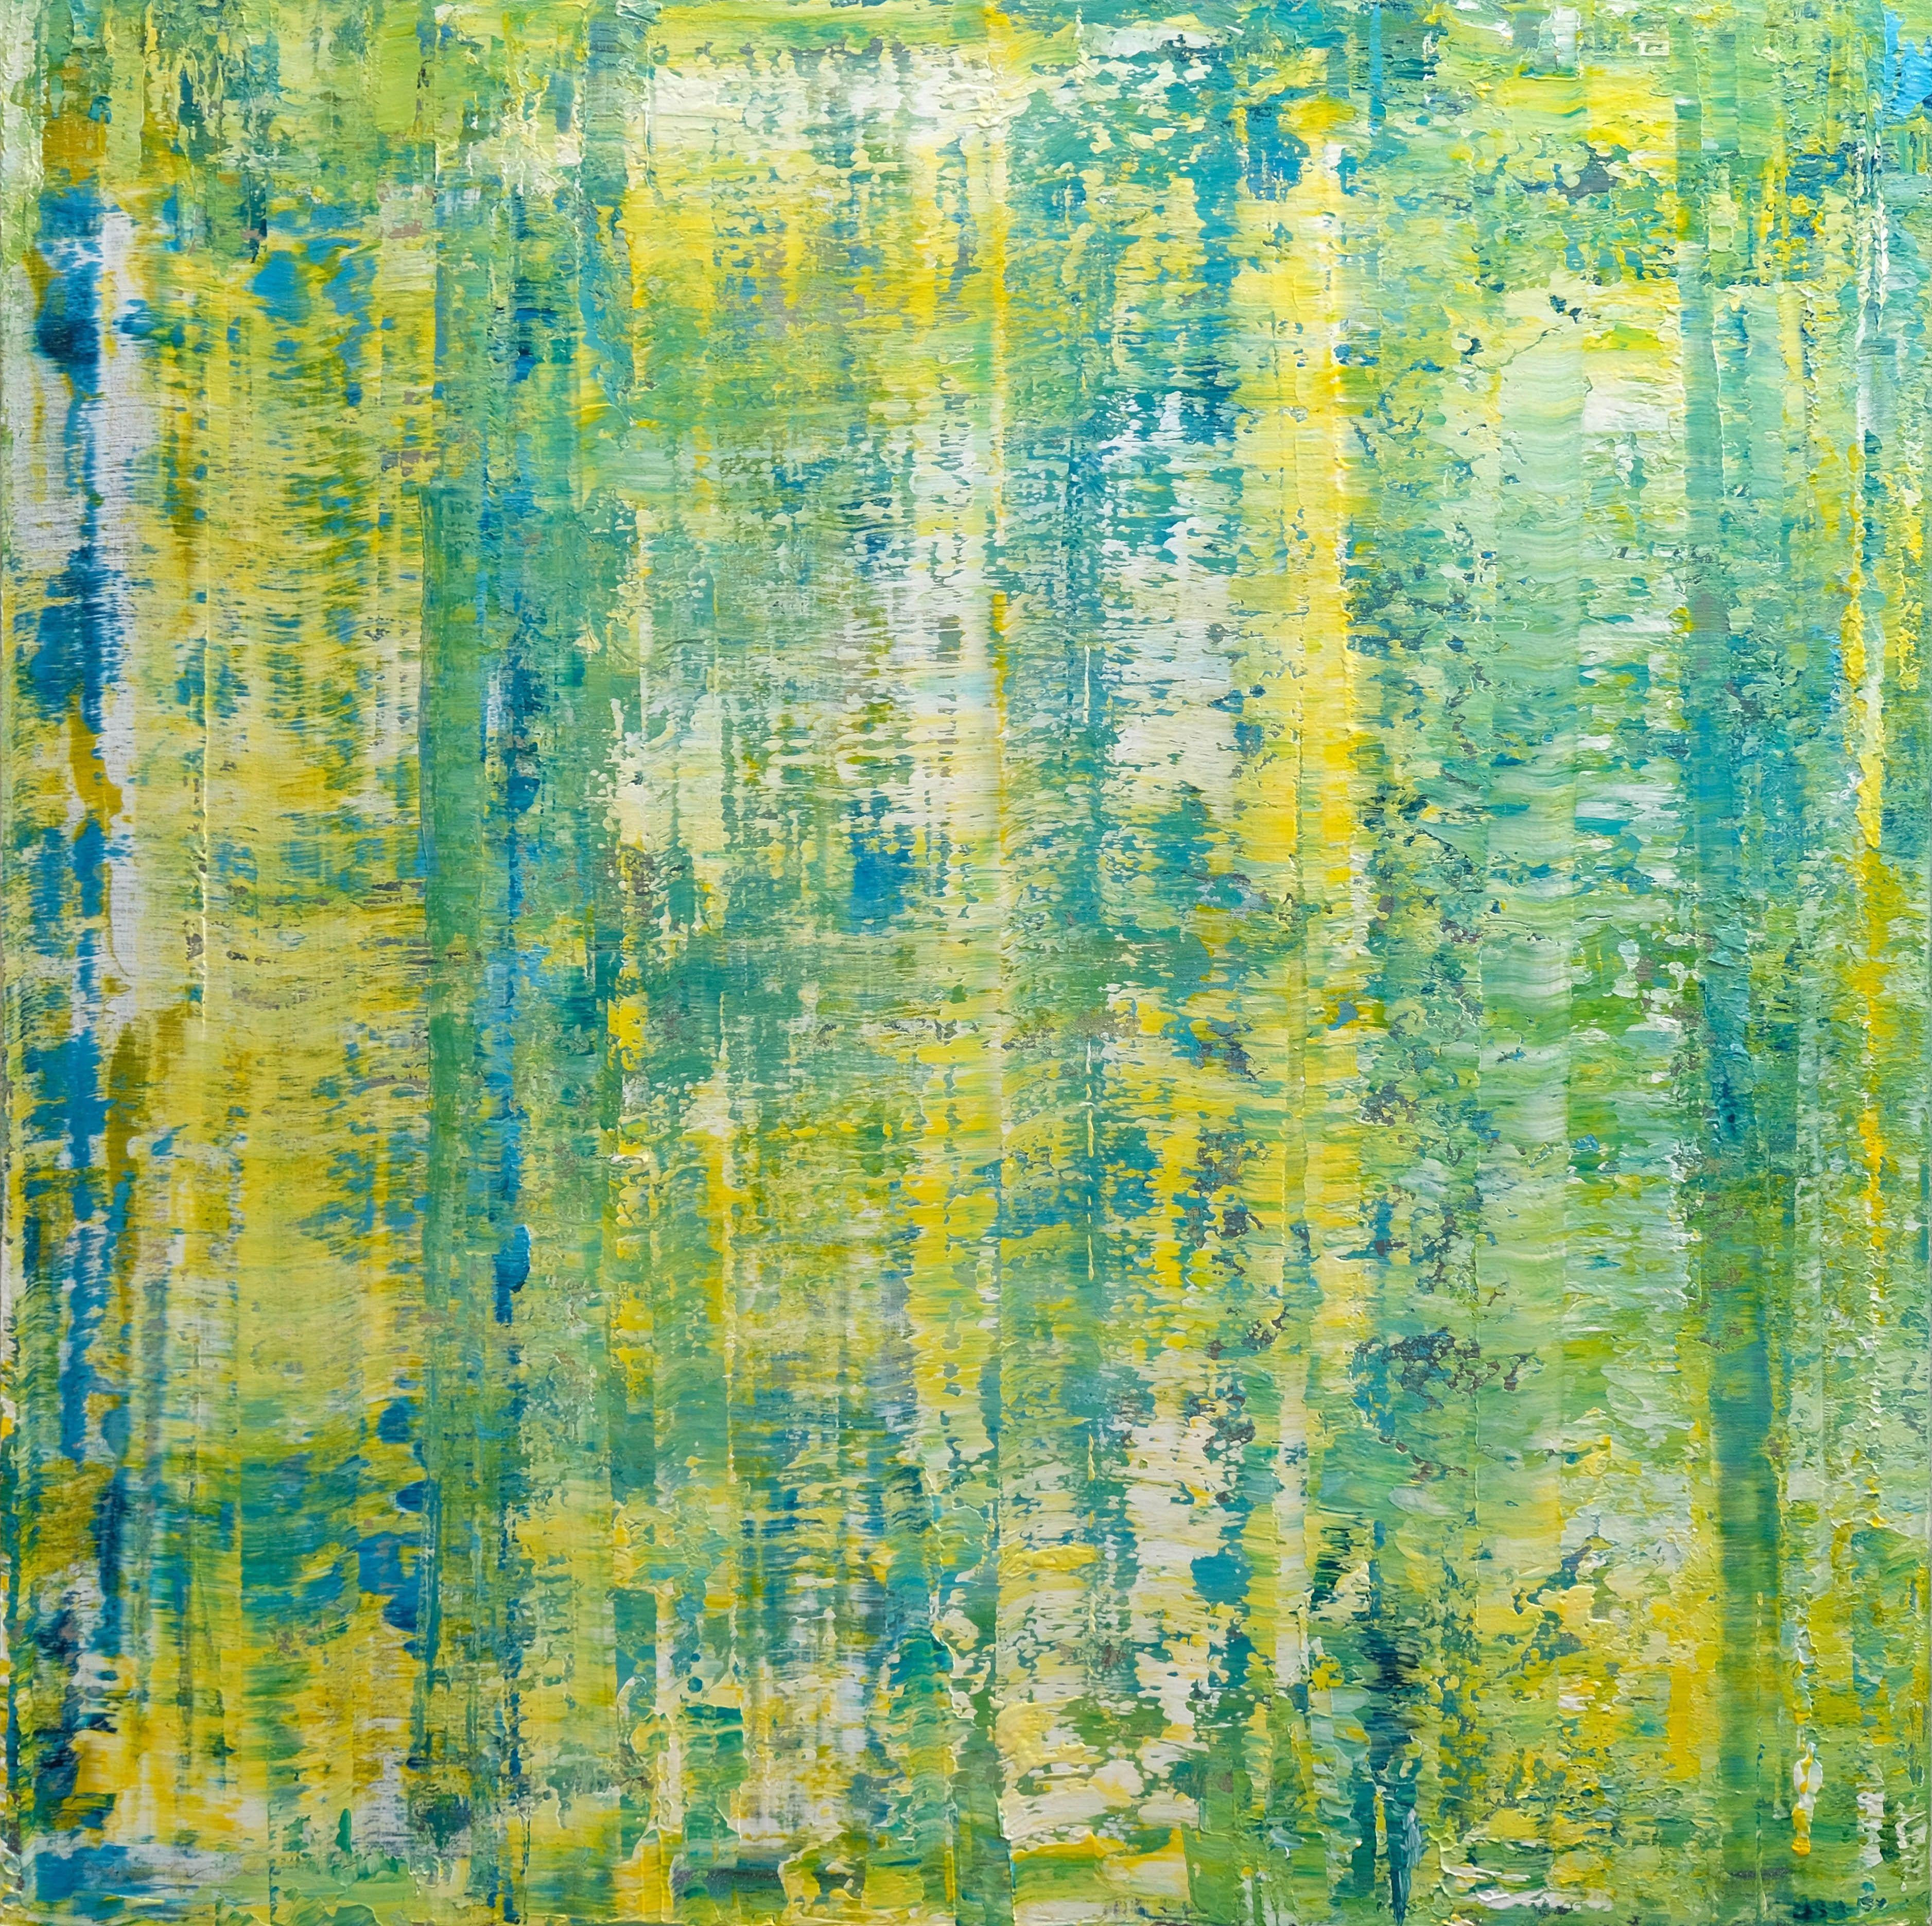 Behshad Arjomandi Abstract Painting - Green Abstract Composition II, Painting, Acrylic on Canvas